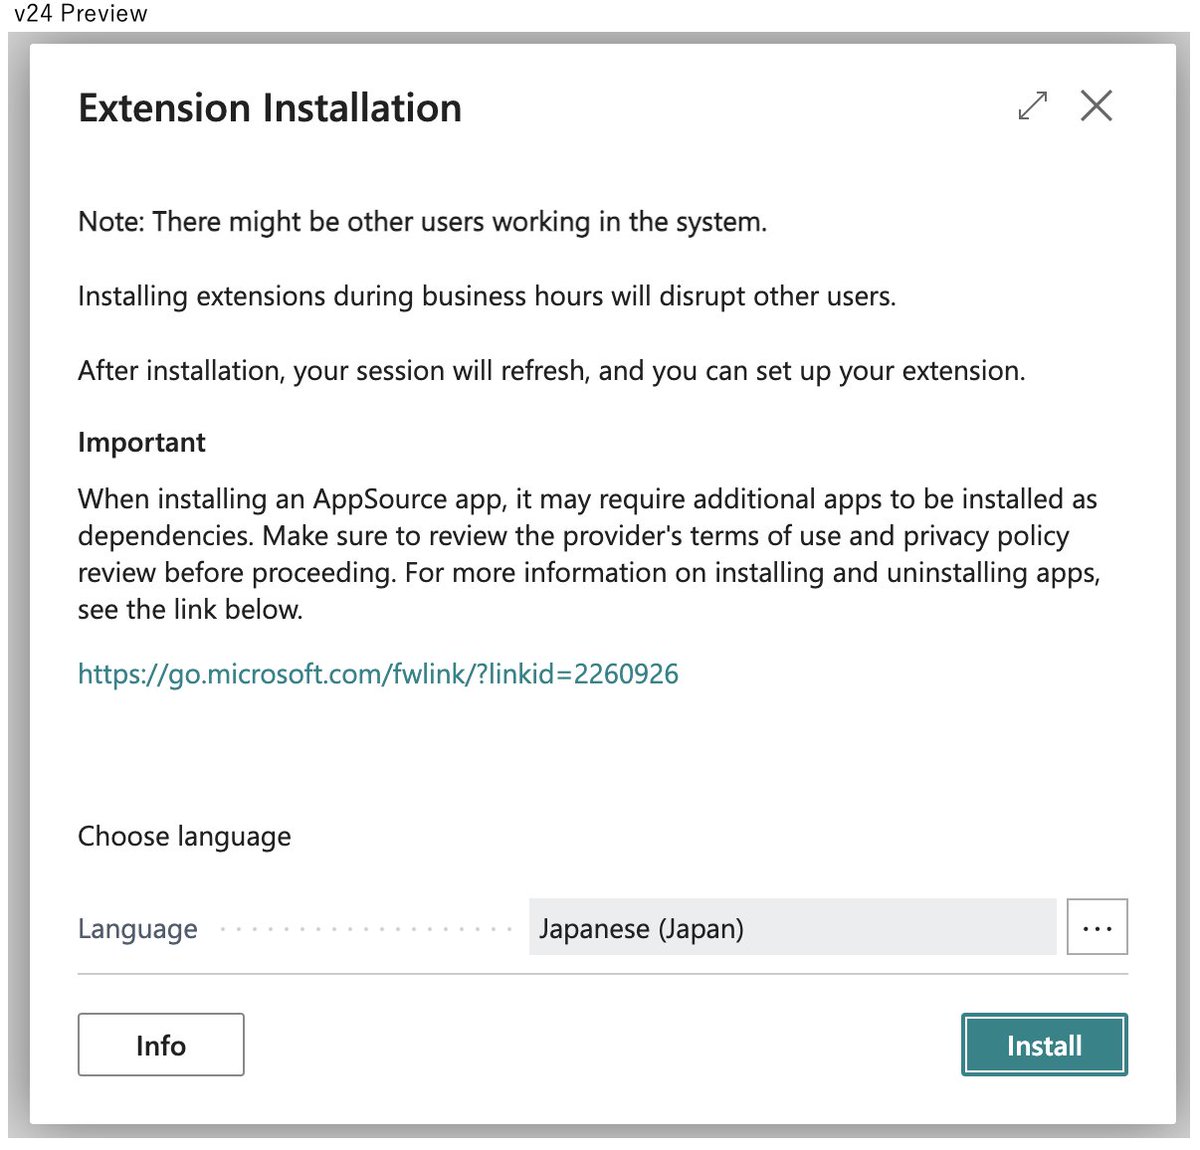 Extension Installation page is going to change from v24?
<- v23.5  24.0 Preview ->
#msdyn365bc #msdyn365 #2024wave1